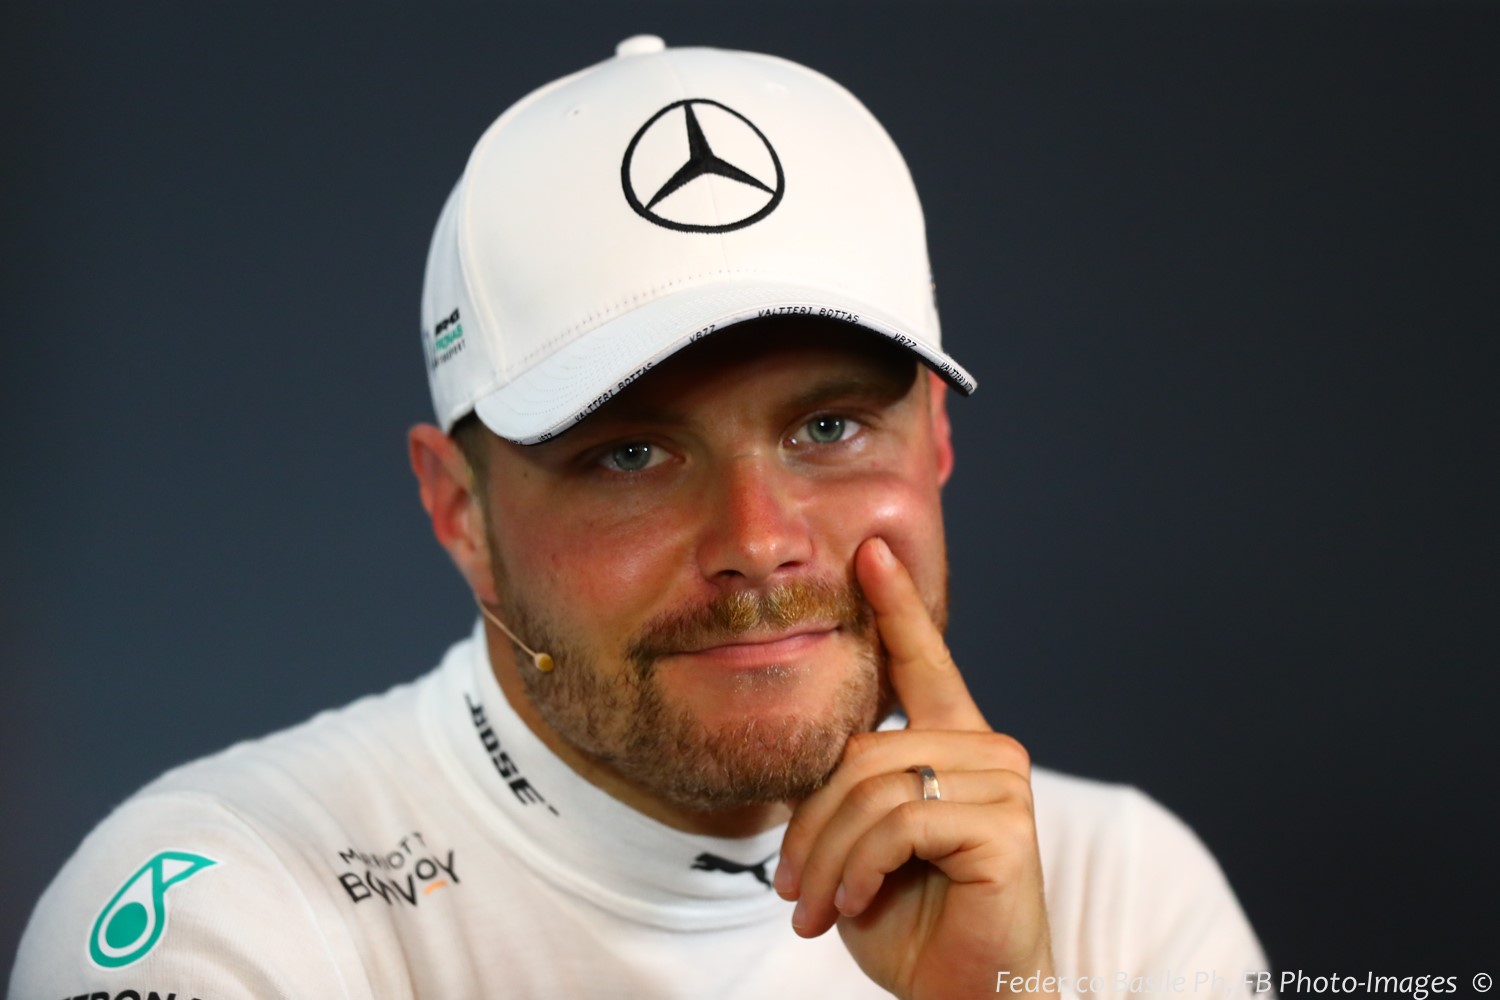 Now that he has divorced his wife, Bottas has no distractions and is fully focused on winning